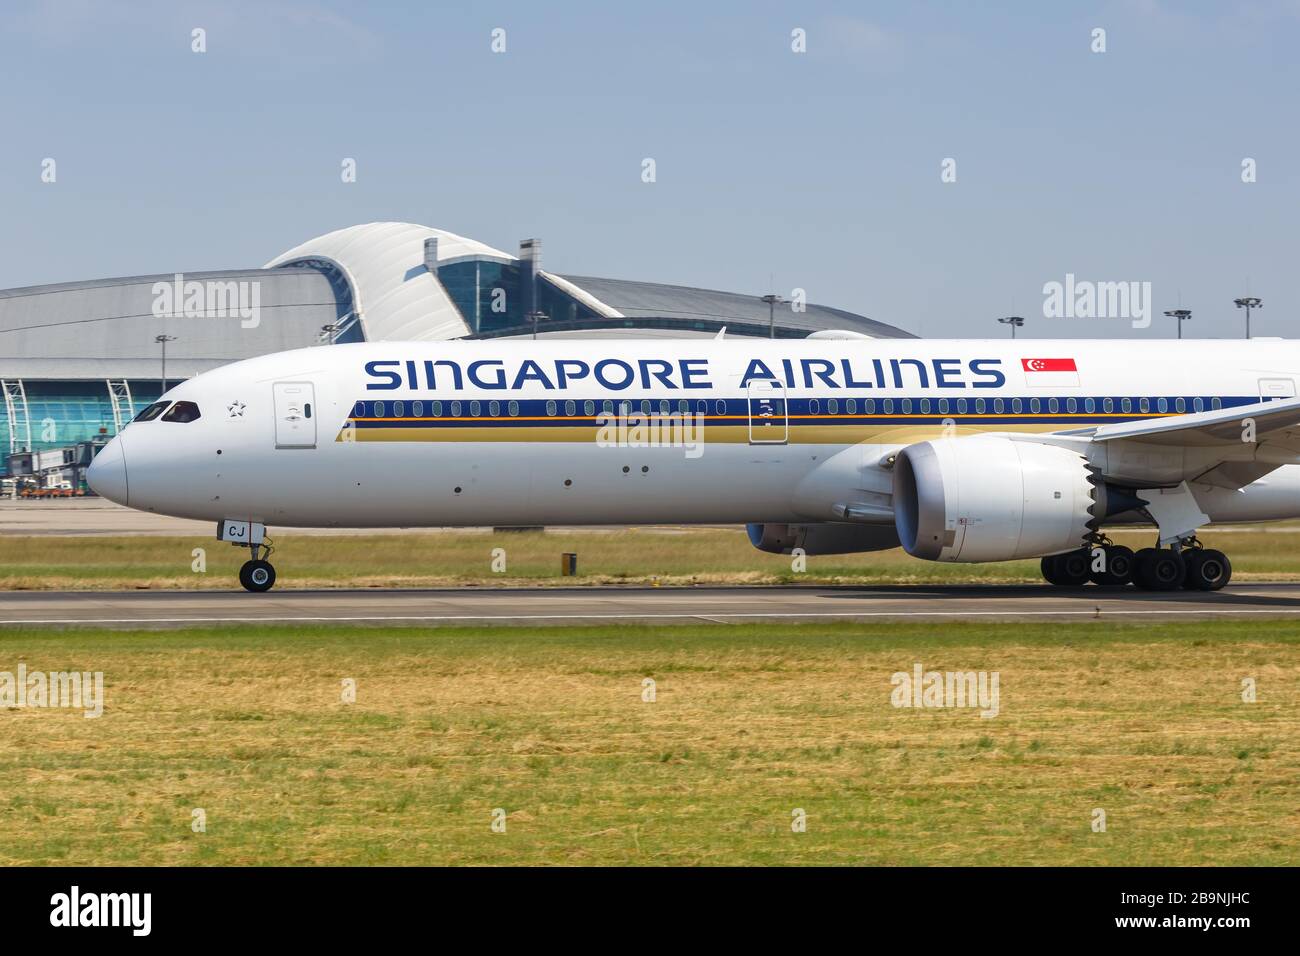 Guangzhou, China – September 23, 2019: Singapore Airlines Boeing 787-10 Dreamliner airplane at Guangzhou airport (CAN) in China. Boeing is an American Stock Photo